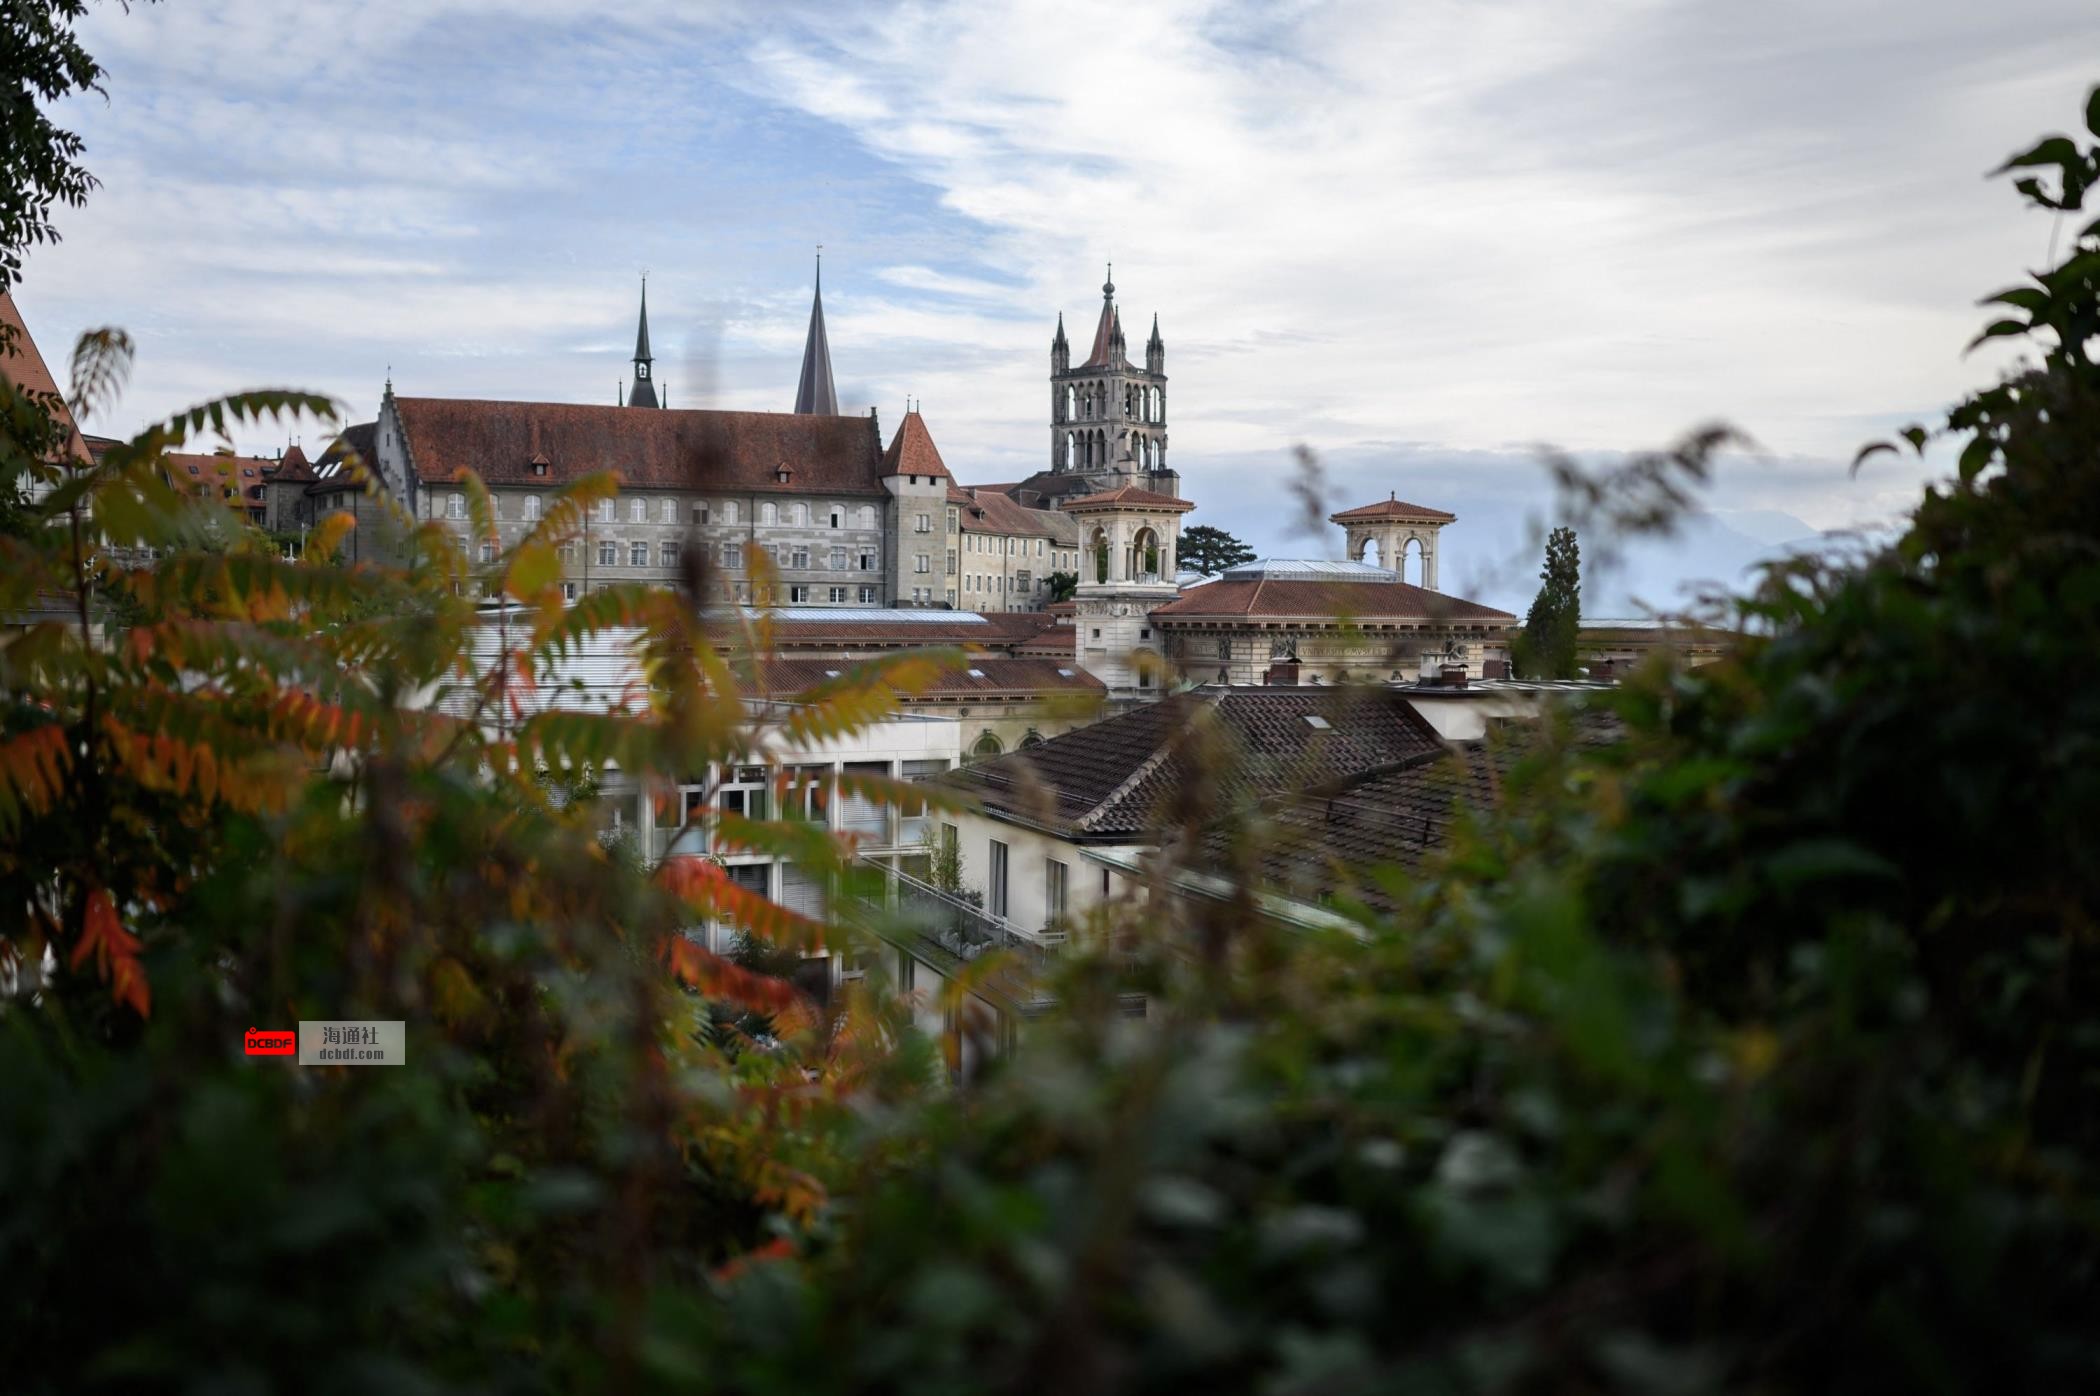 "La Cite," the old quarter of Lausanne with its cathedral, Lausanne, Switzerland, Oct. 12, 2021. (AFP Photo)